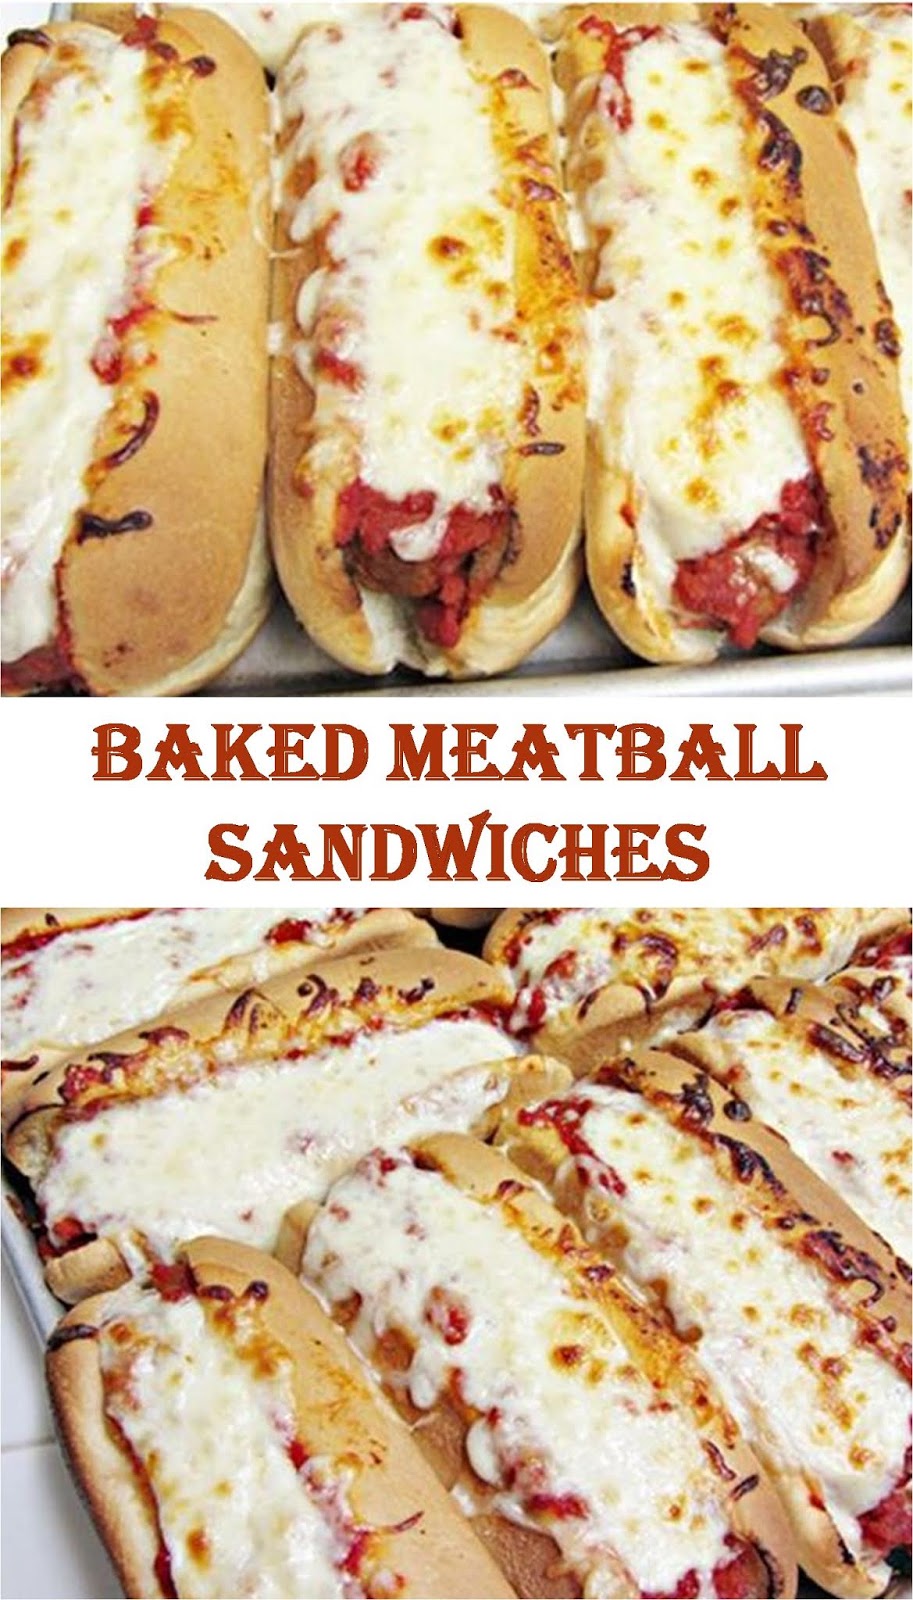 1309 Reviews: My BEST #Recipes >> Baked #Meatballs Sandwiches - .....